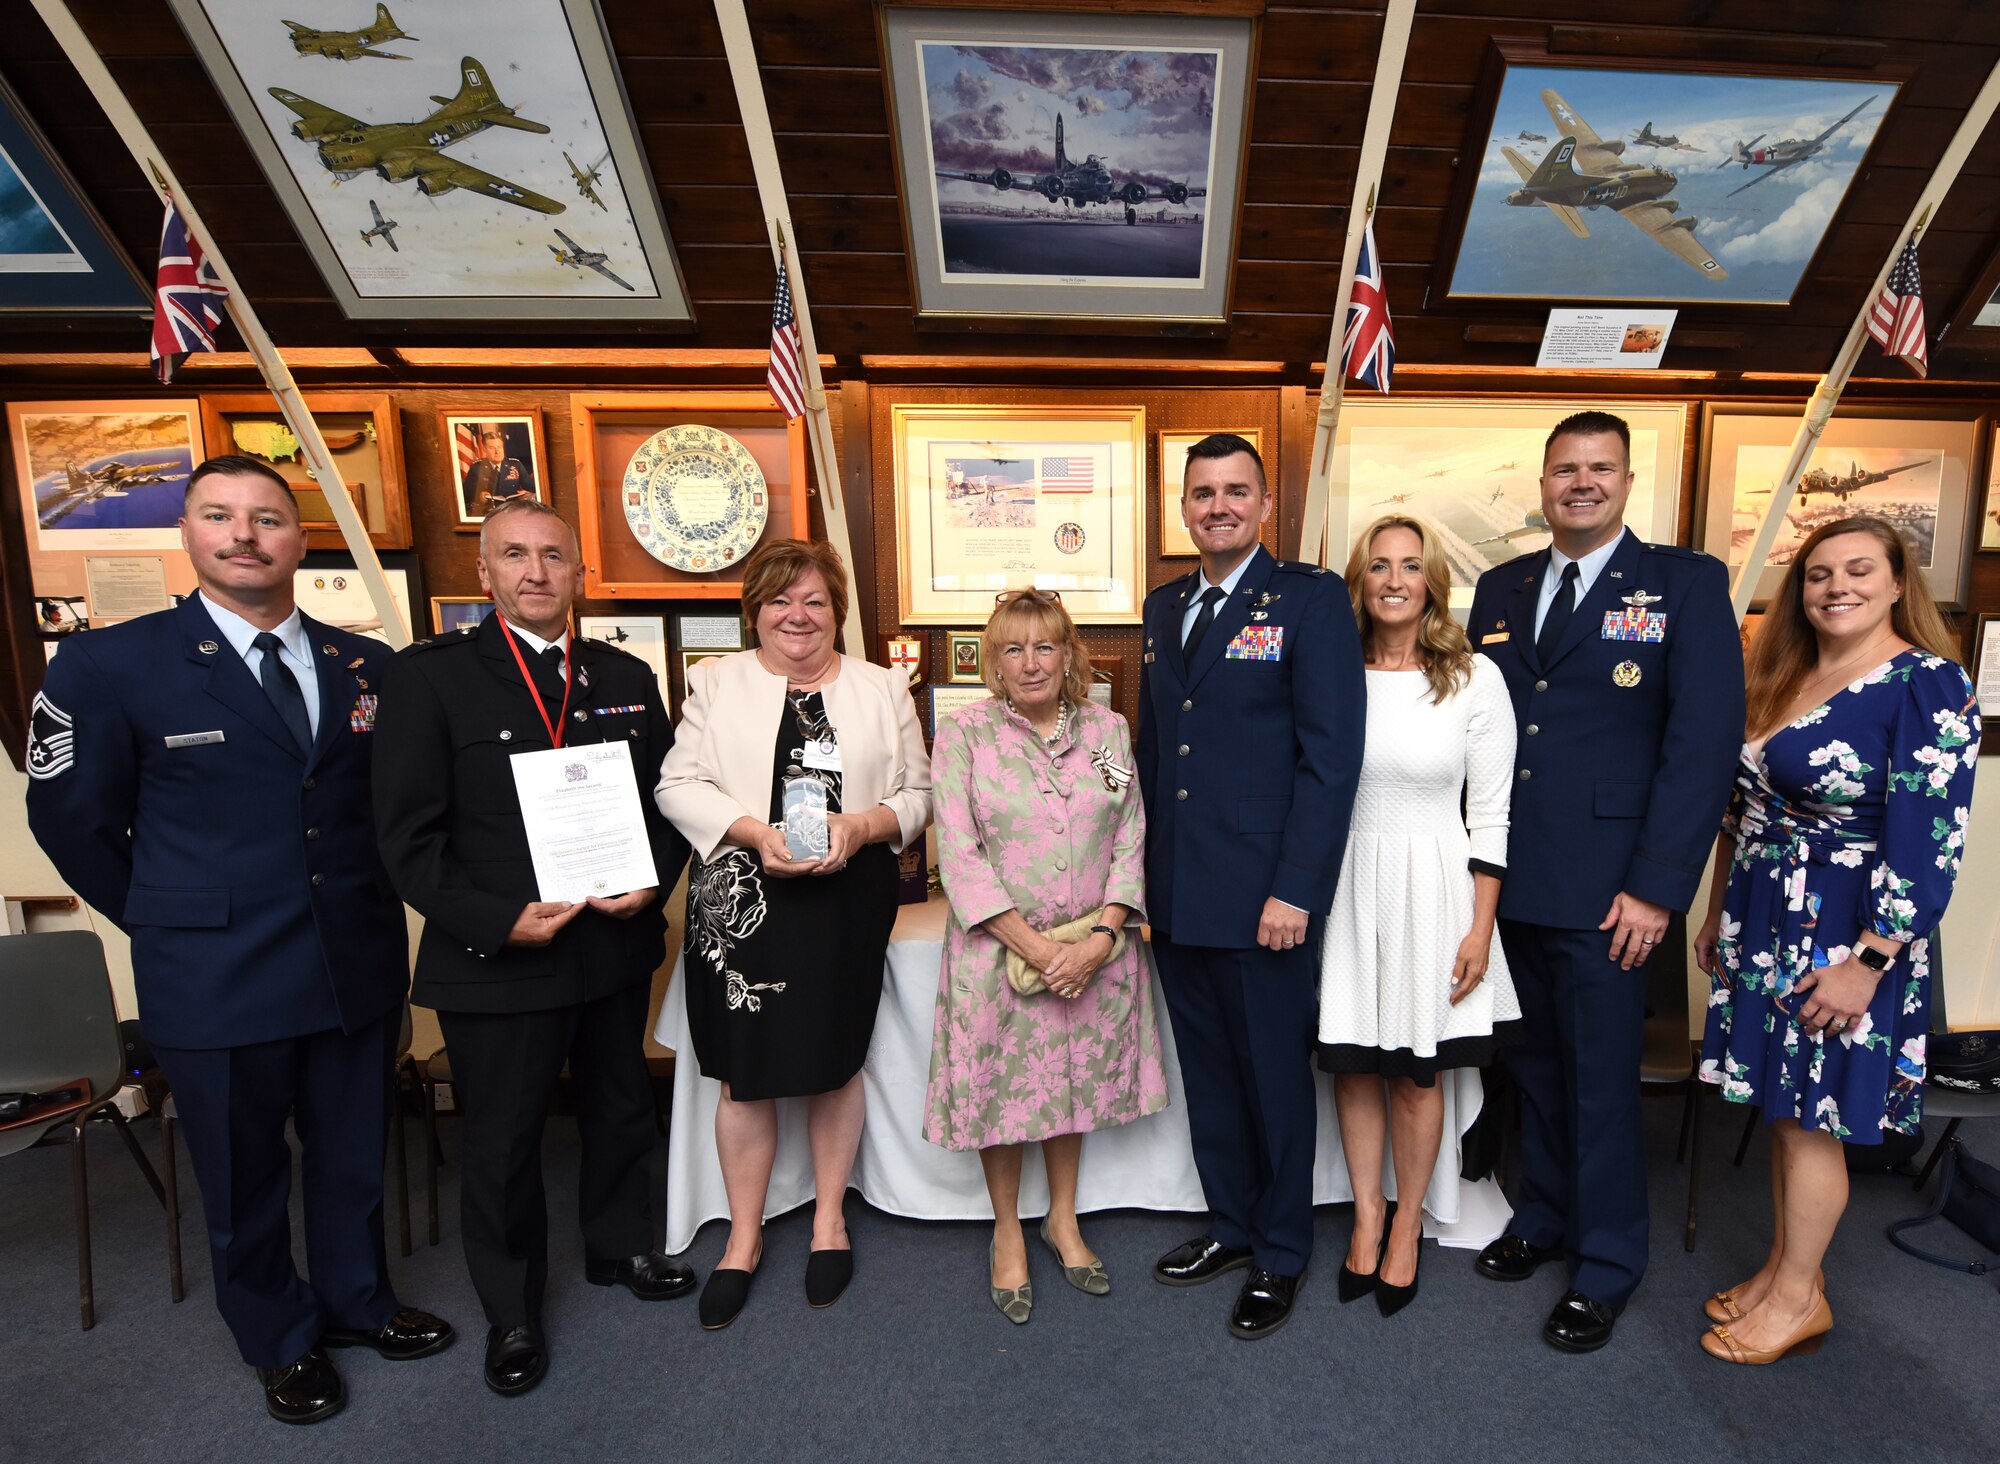 Long-time volunteers at the 100th Bomb Group Memorial Museum, along with Royal Air Force Mildenhall leadership and spouses, proudly show off their Queen’s Award for Voluntary Service, presented by The Lady Dannatt, center, MBE, HM Lord-Lieutenant of Norfolk, at Thorpe Abbotts, Norfolk, England, Sept. 8, 2022. The award, signed by the Queen, is the highest award given to volunteer groups across the United Kingdom, and became poignant and bittersweet as it was presented on the day Her Majesty Queen Elizabeth II passed away. Only two volunteer groups in Norfolk received the award as part of the Platinum Jubilee and in recognition of extraordinary service to the community. The 100th Air Refueling Wing’s heritage dates back to the 100th Bomb Group and the museum is dedicated to Airmen of the Eighth Air Force who served during World War II. (U.S. Air Force photo by Karen Abeyasekere)